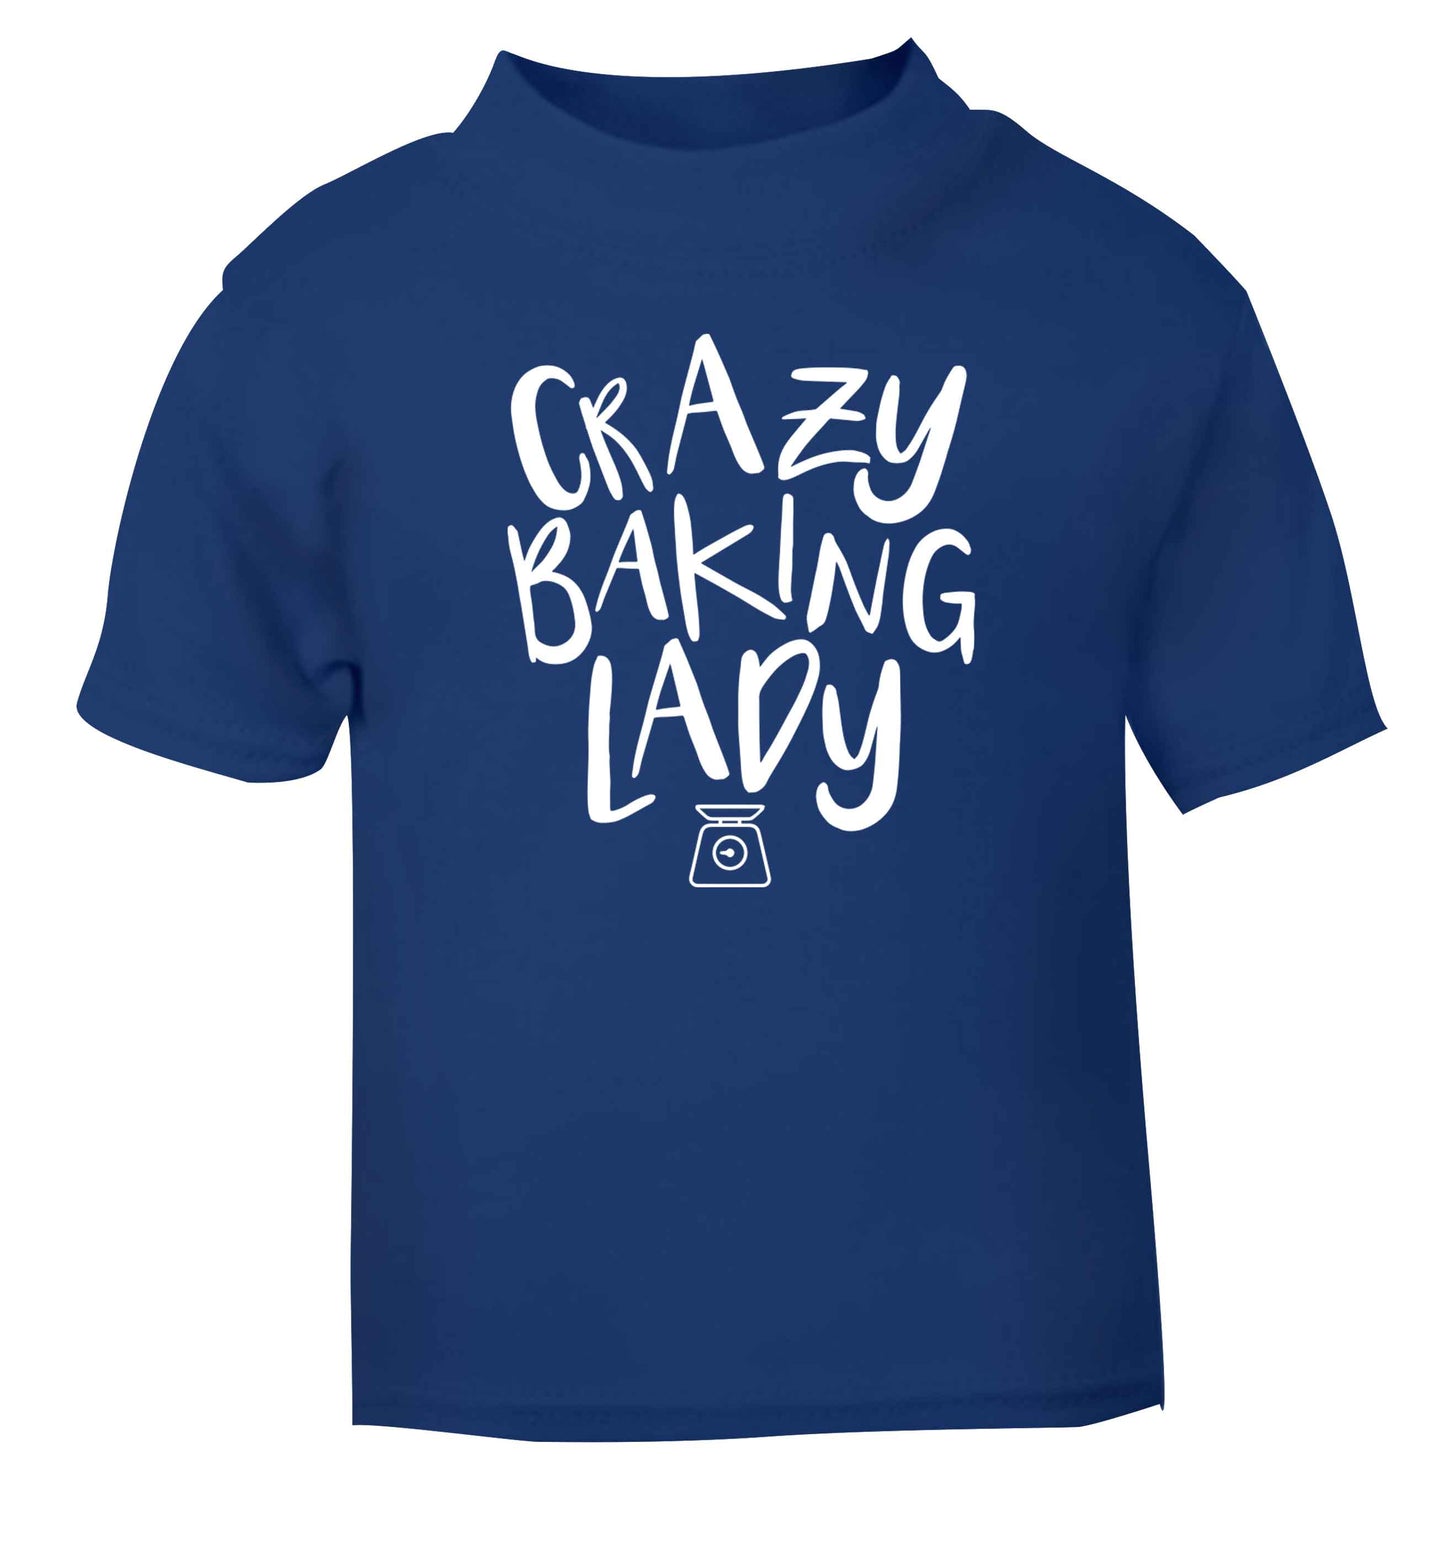 Crazy baking lady blue Baby Toddler Tshirt 2 Years